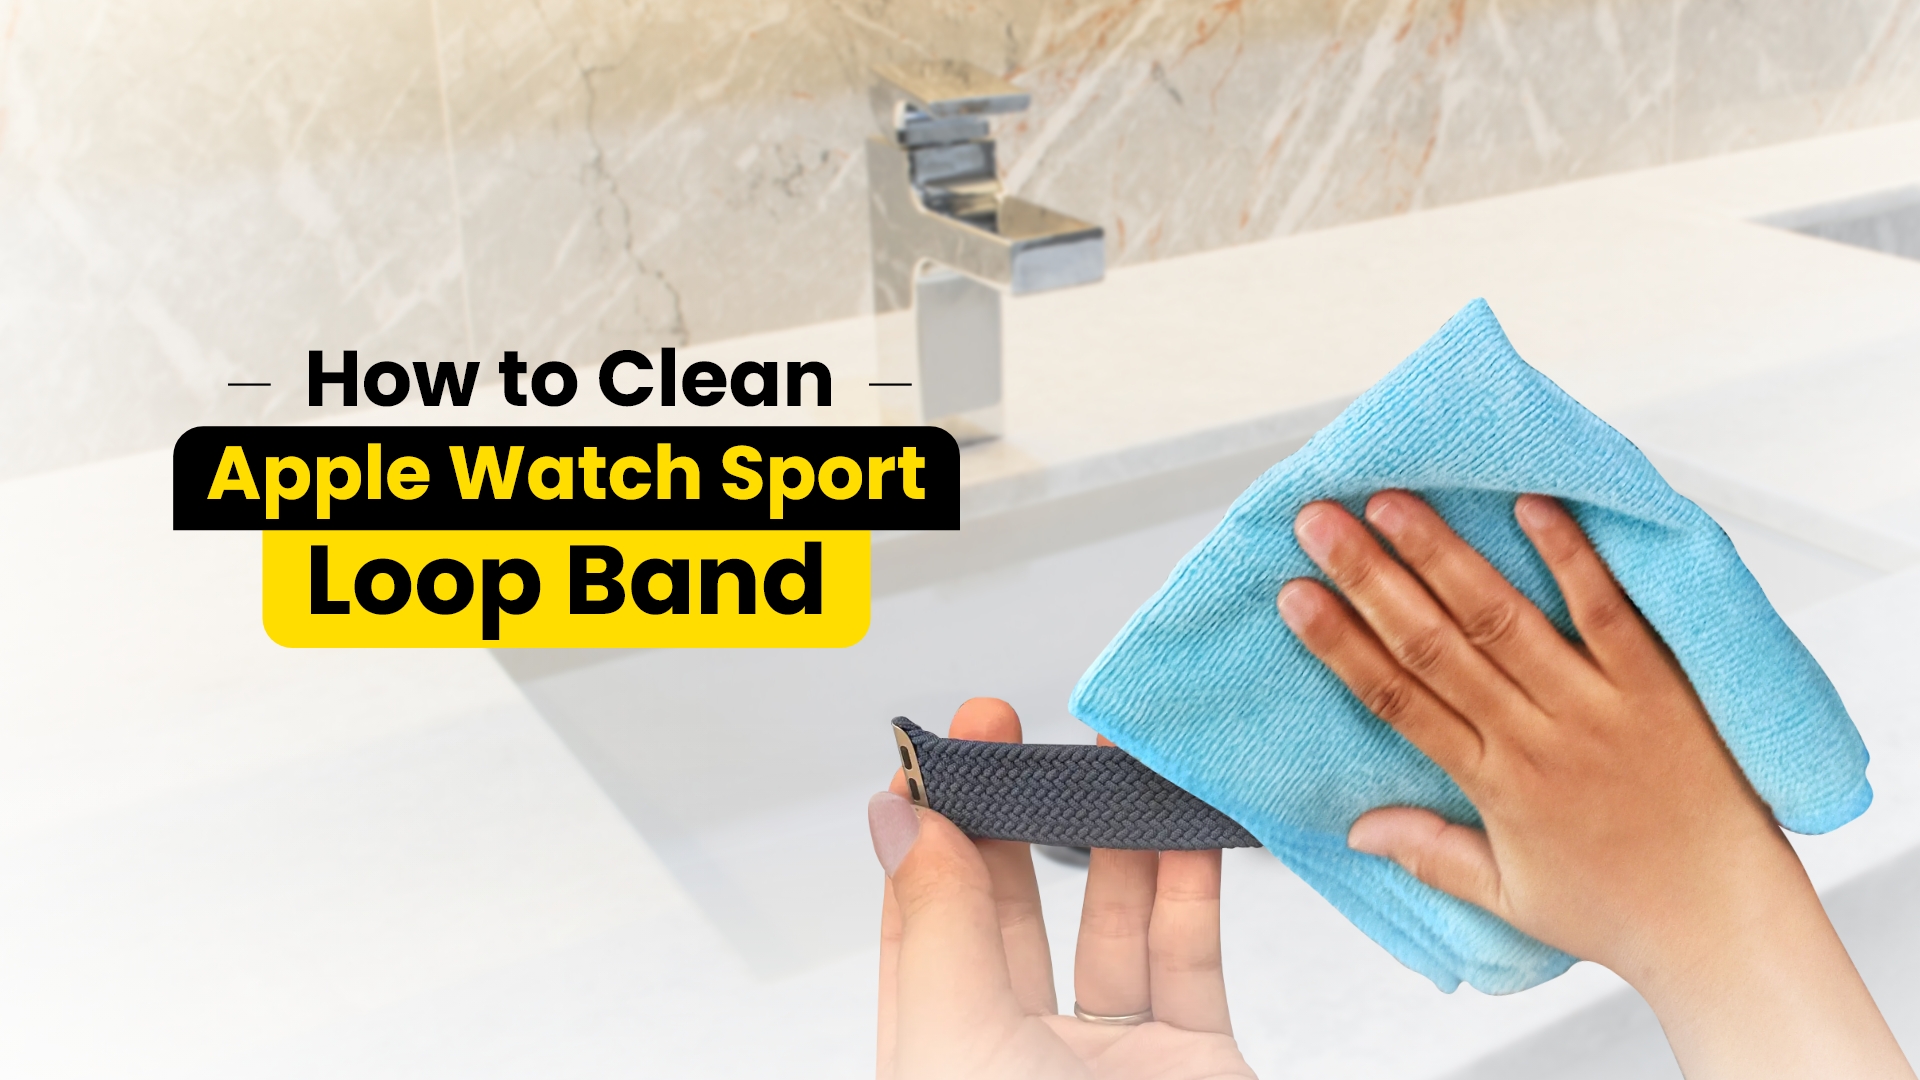 How to Clean Apple Watch Sport Loop Band